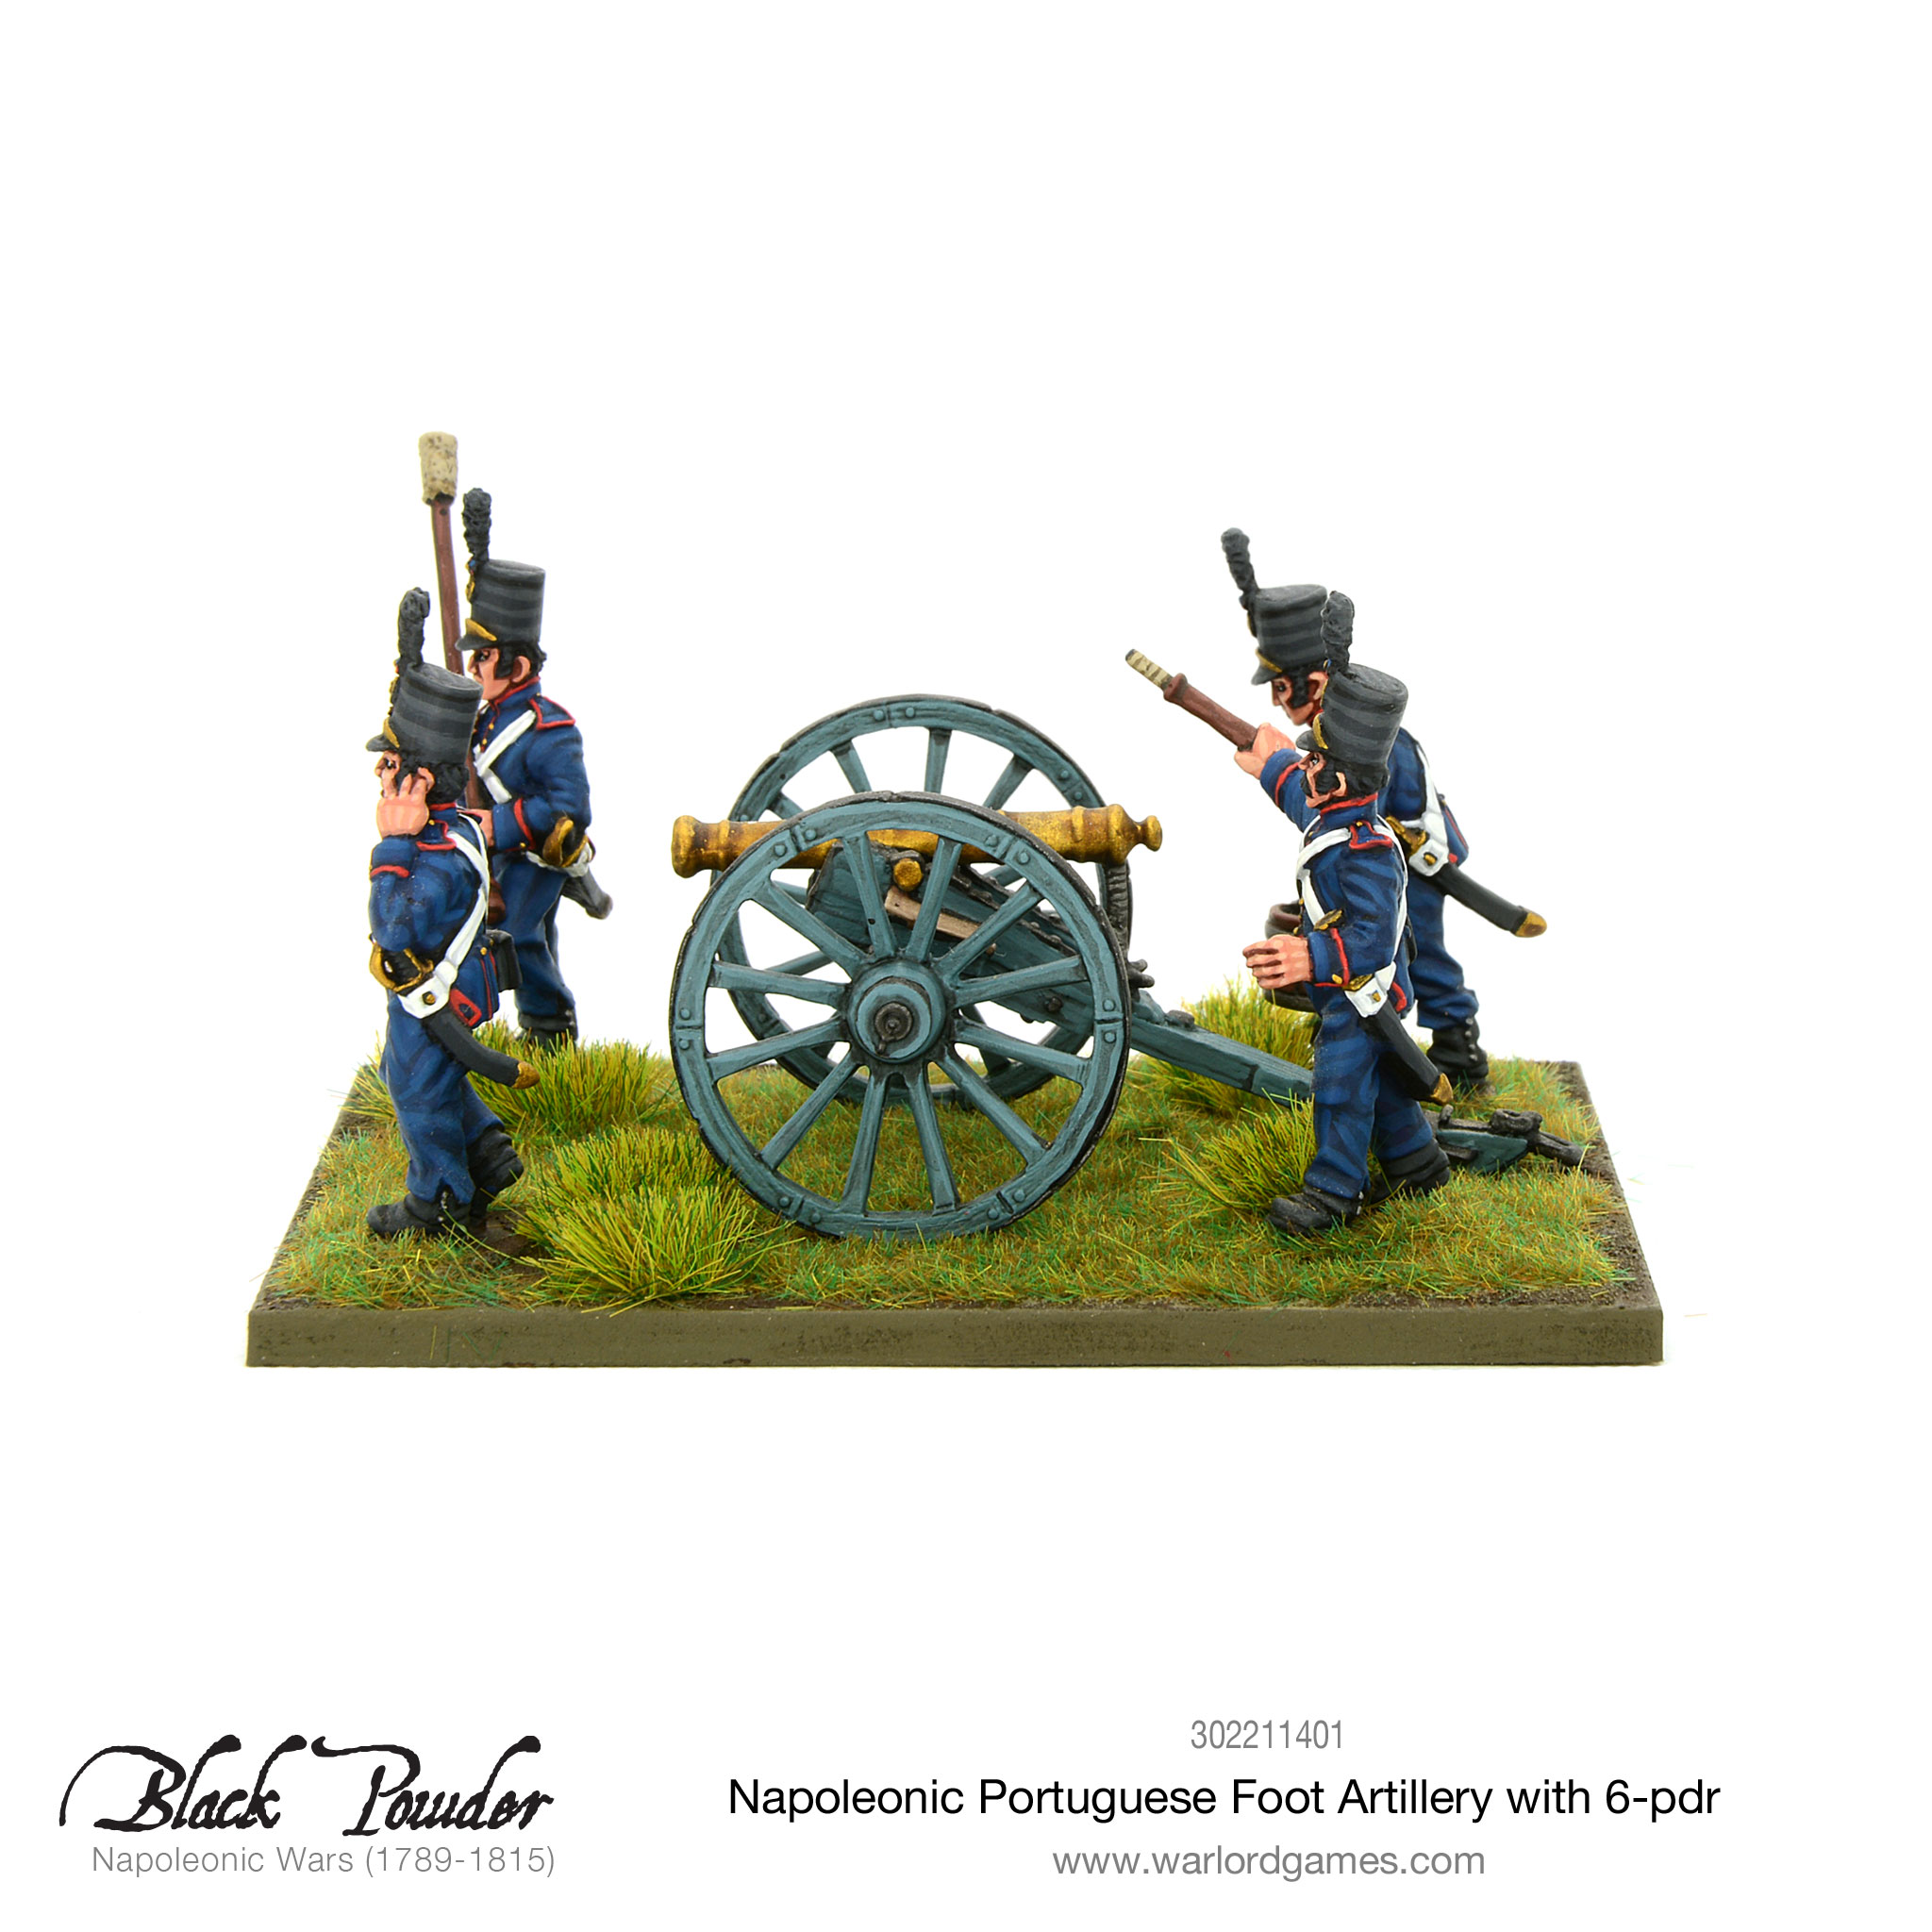 New: Napoleonic Portuguese Foot Artillery - Warlord Games